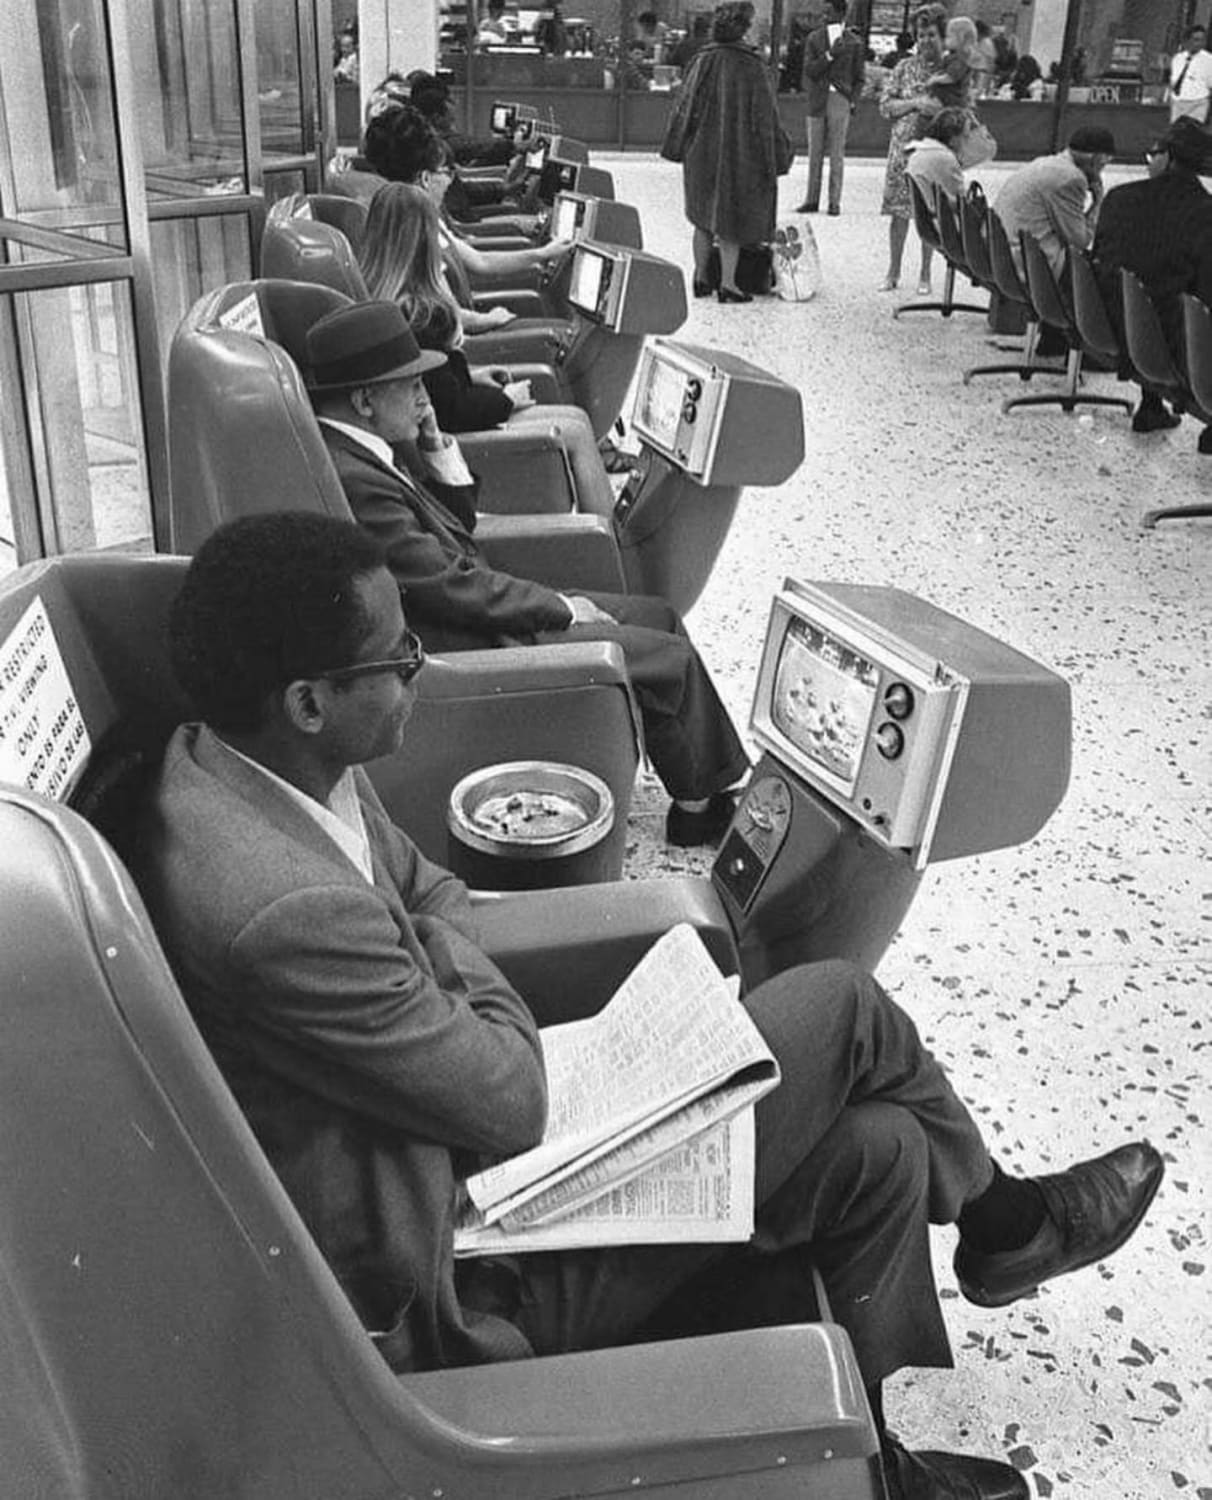 Ashtrays and Coin-operated “Tel-a-chairs” in the Los Angeles Greyhound bus terminal, 1969.